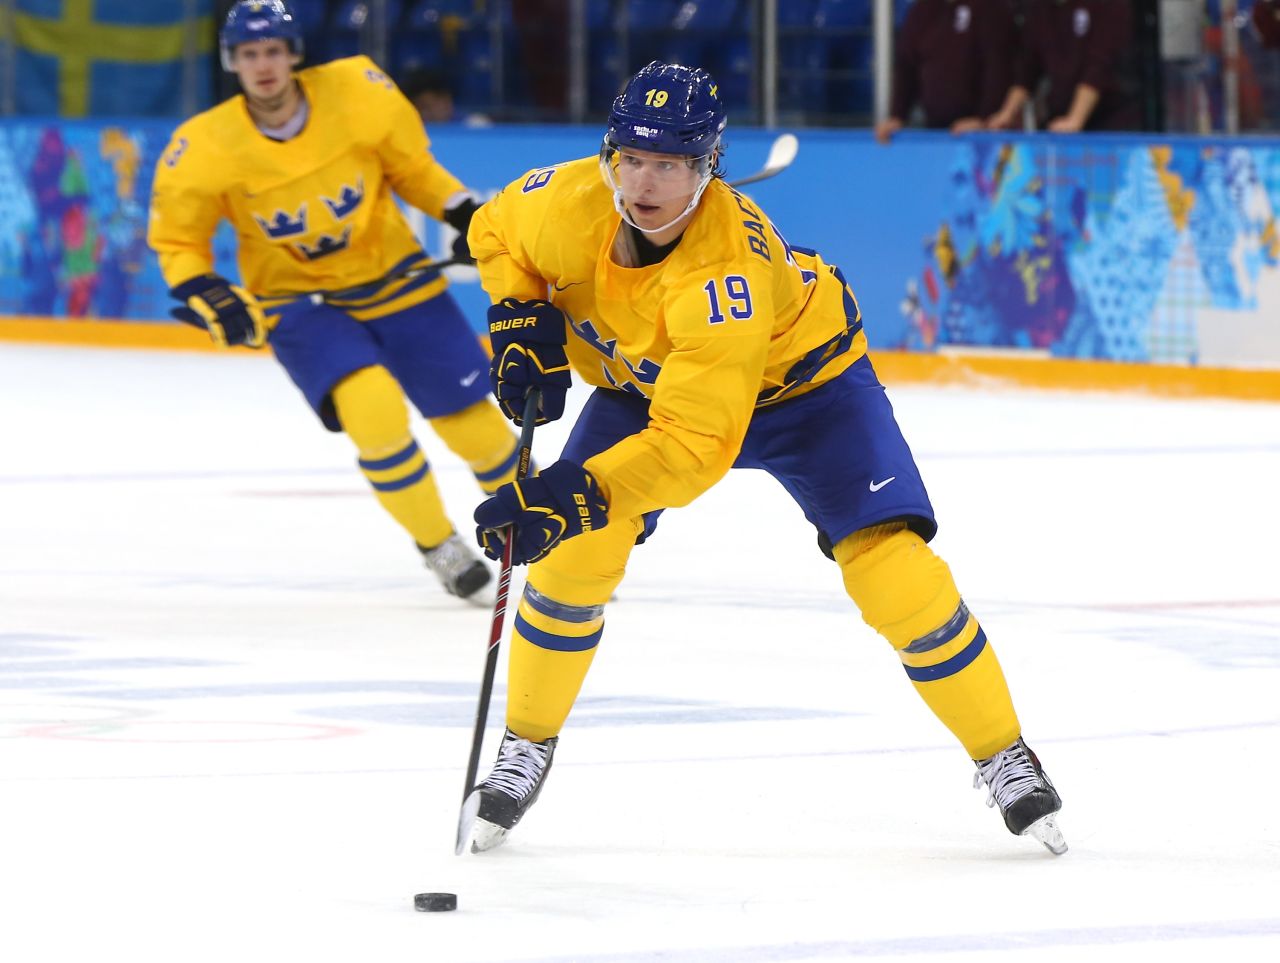 There have been six cases of doping during Sochi 2014. The most high-profile athlete to test positive for a banned substance was Nicklas Backstrom, who played for Sweden in the men's ice hockey gold medal game.